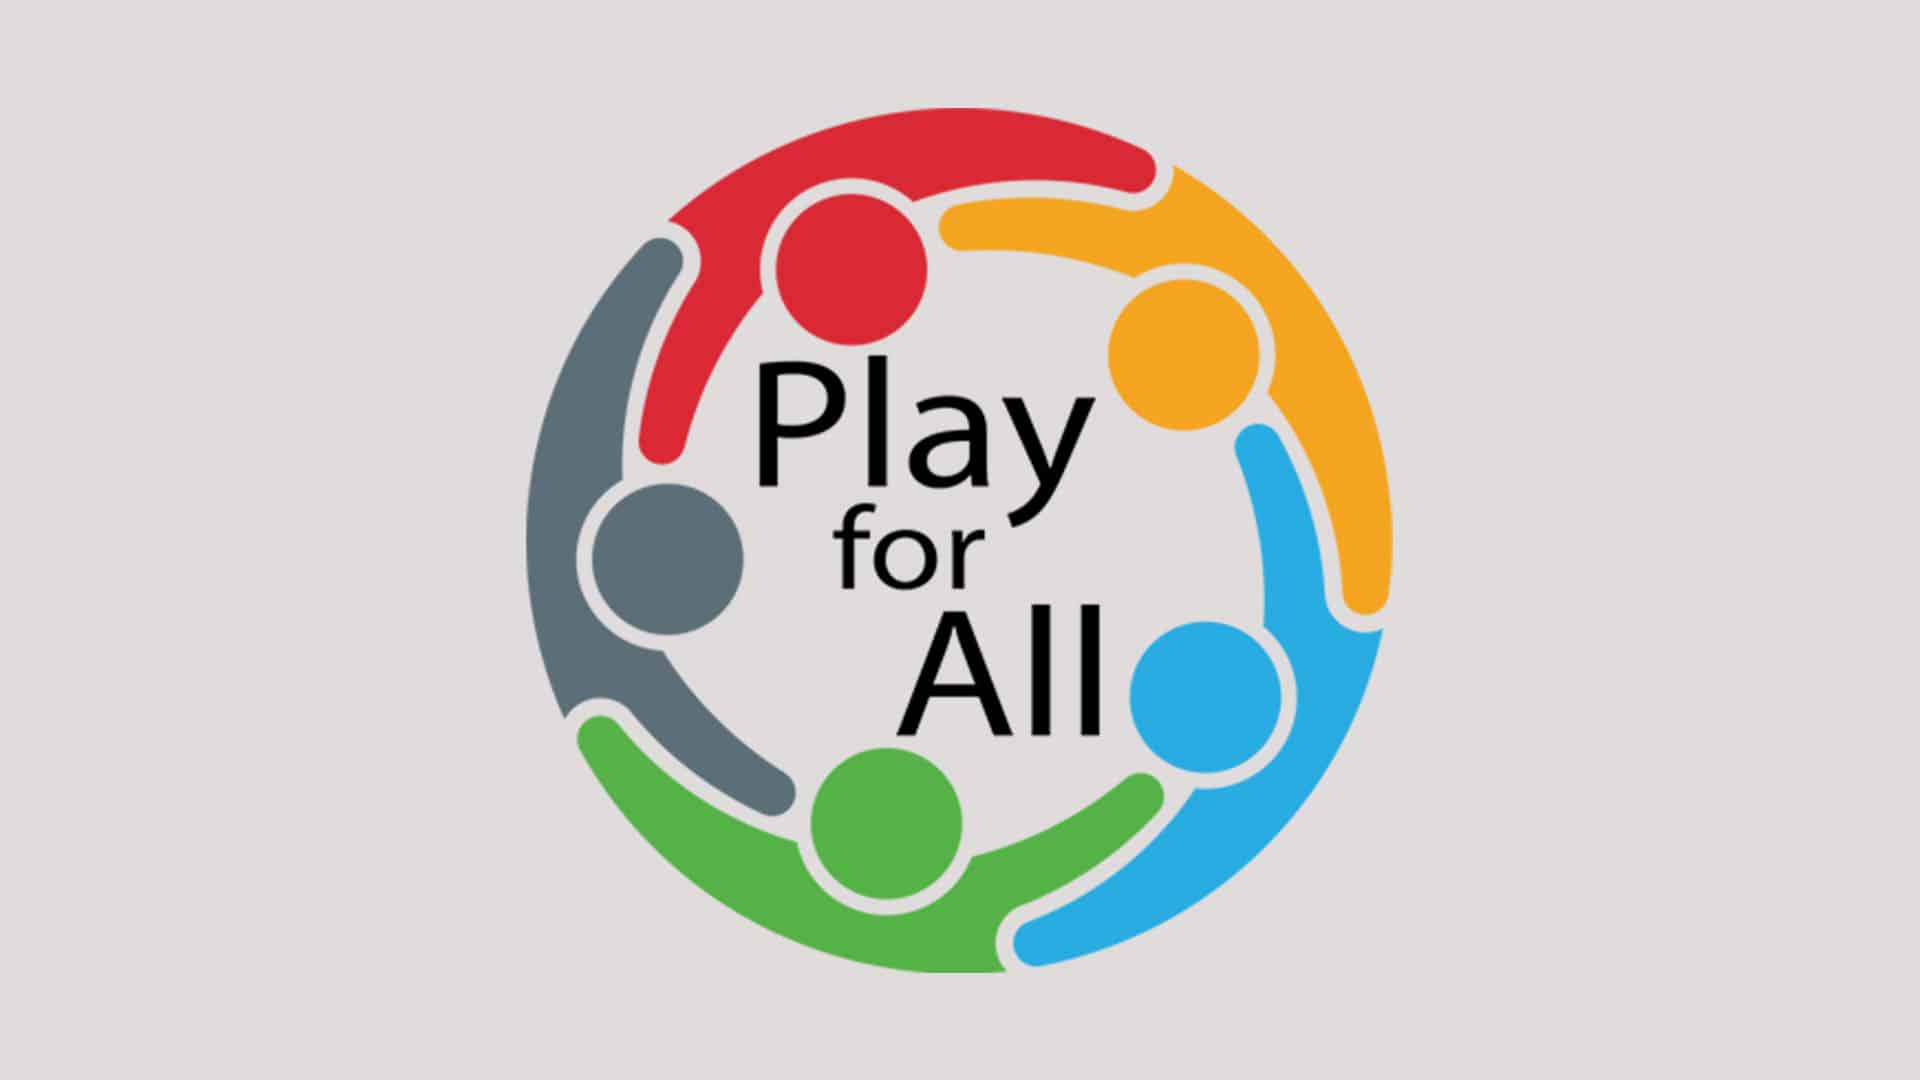 Play For All Park